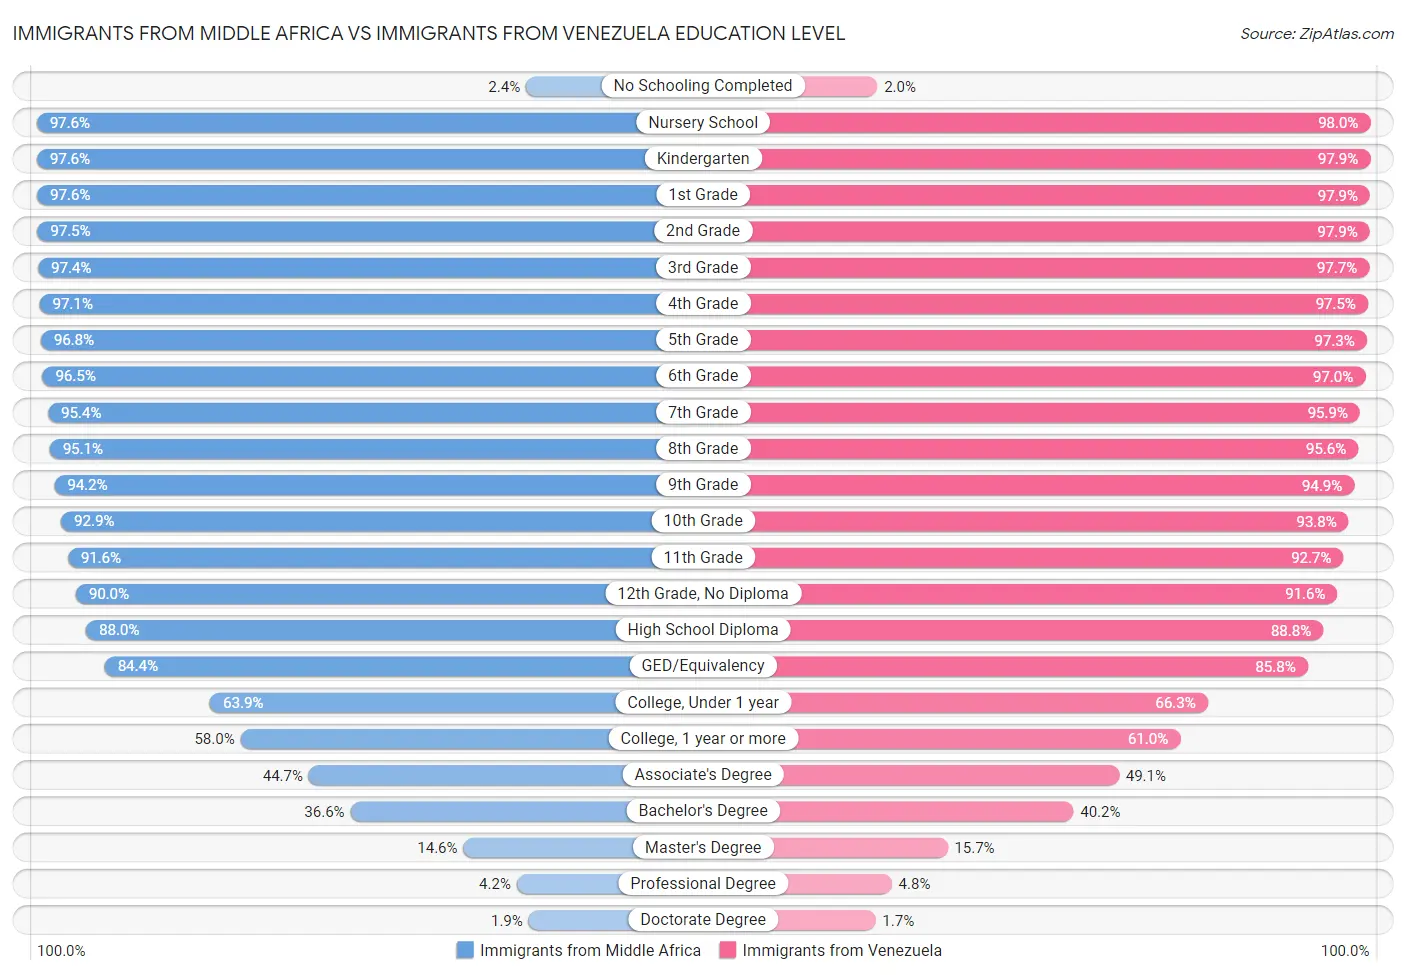 Immigrants from Middle Africa vs Immigrants from Venezuela Education Level